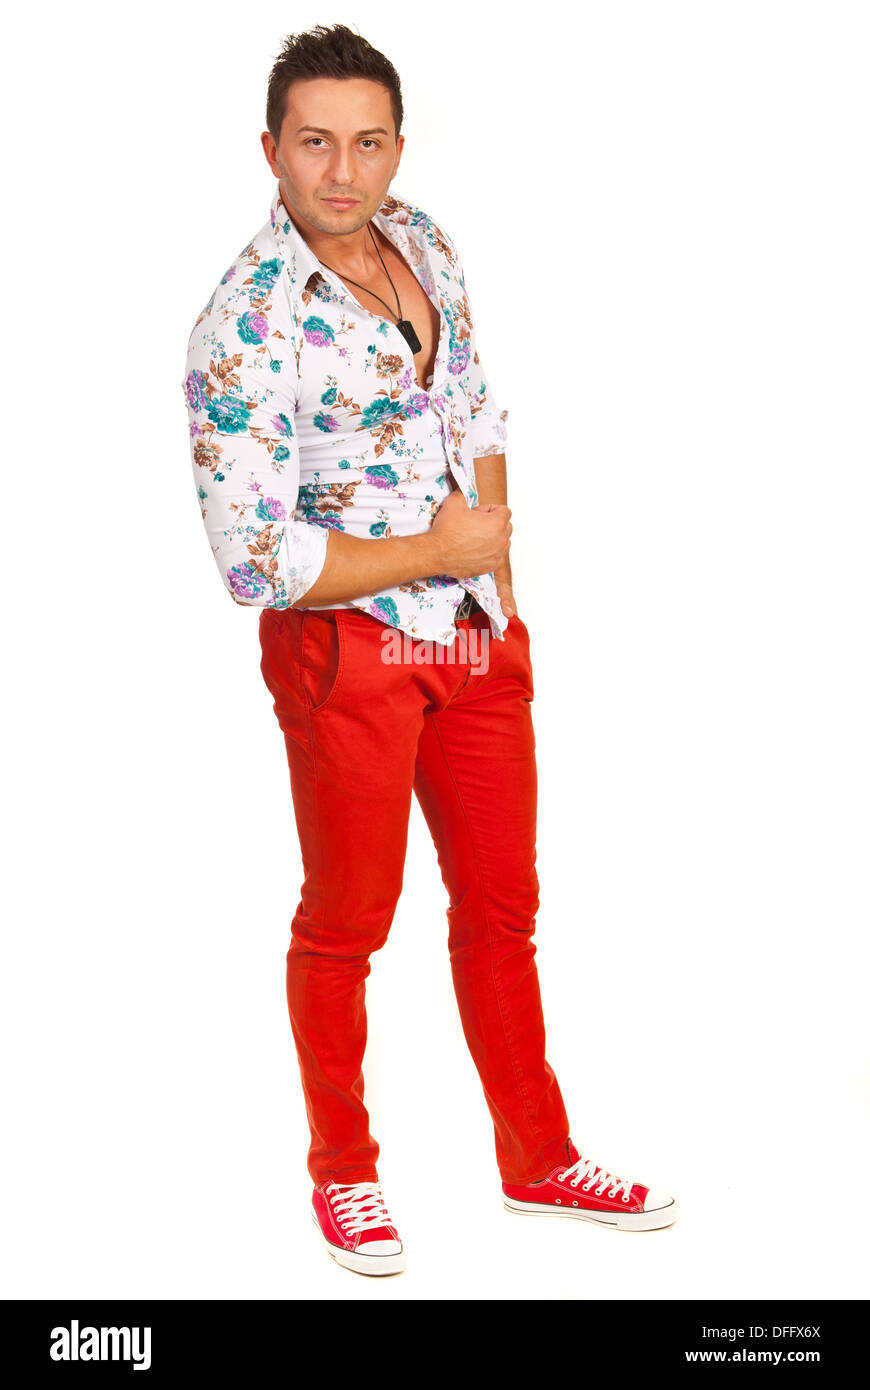 What color shirt goes with red pants? - Quora